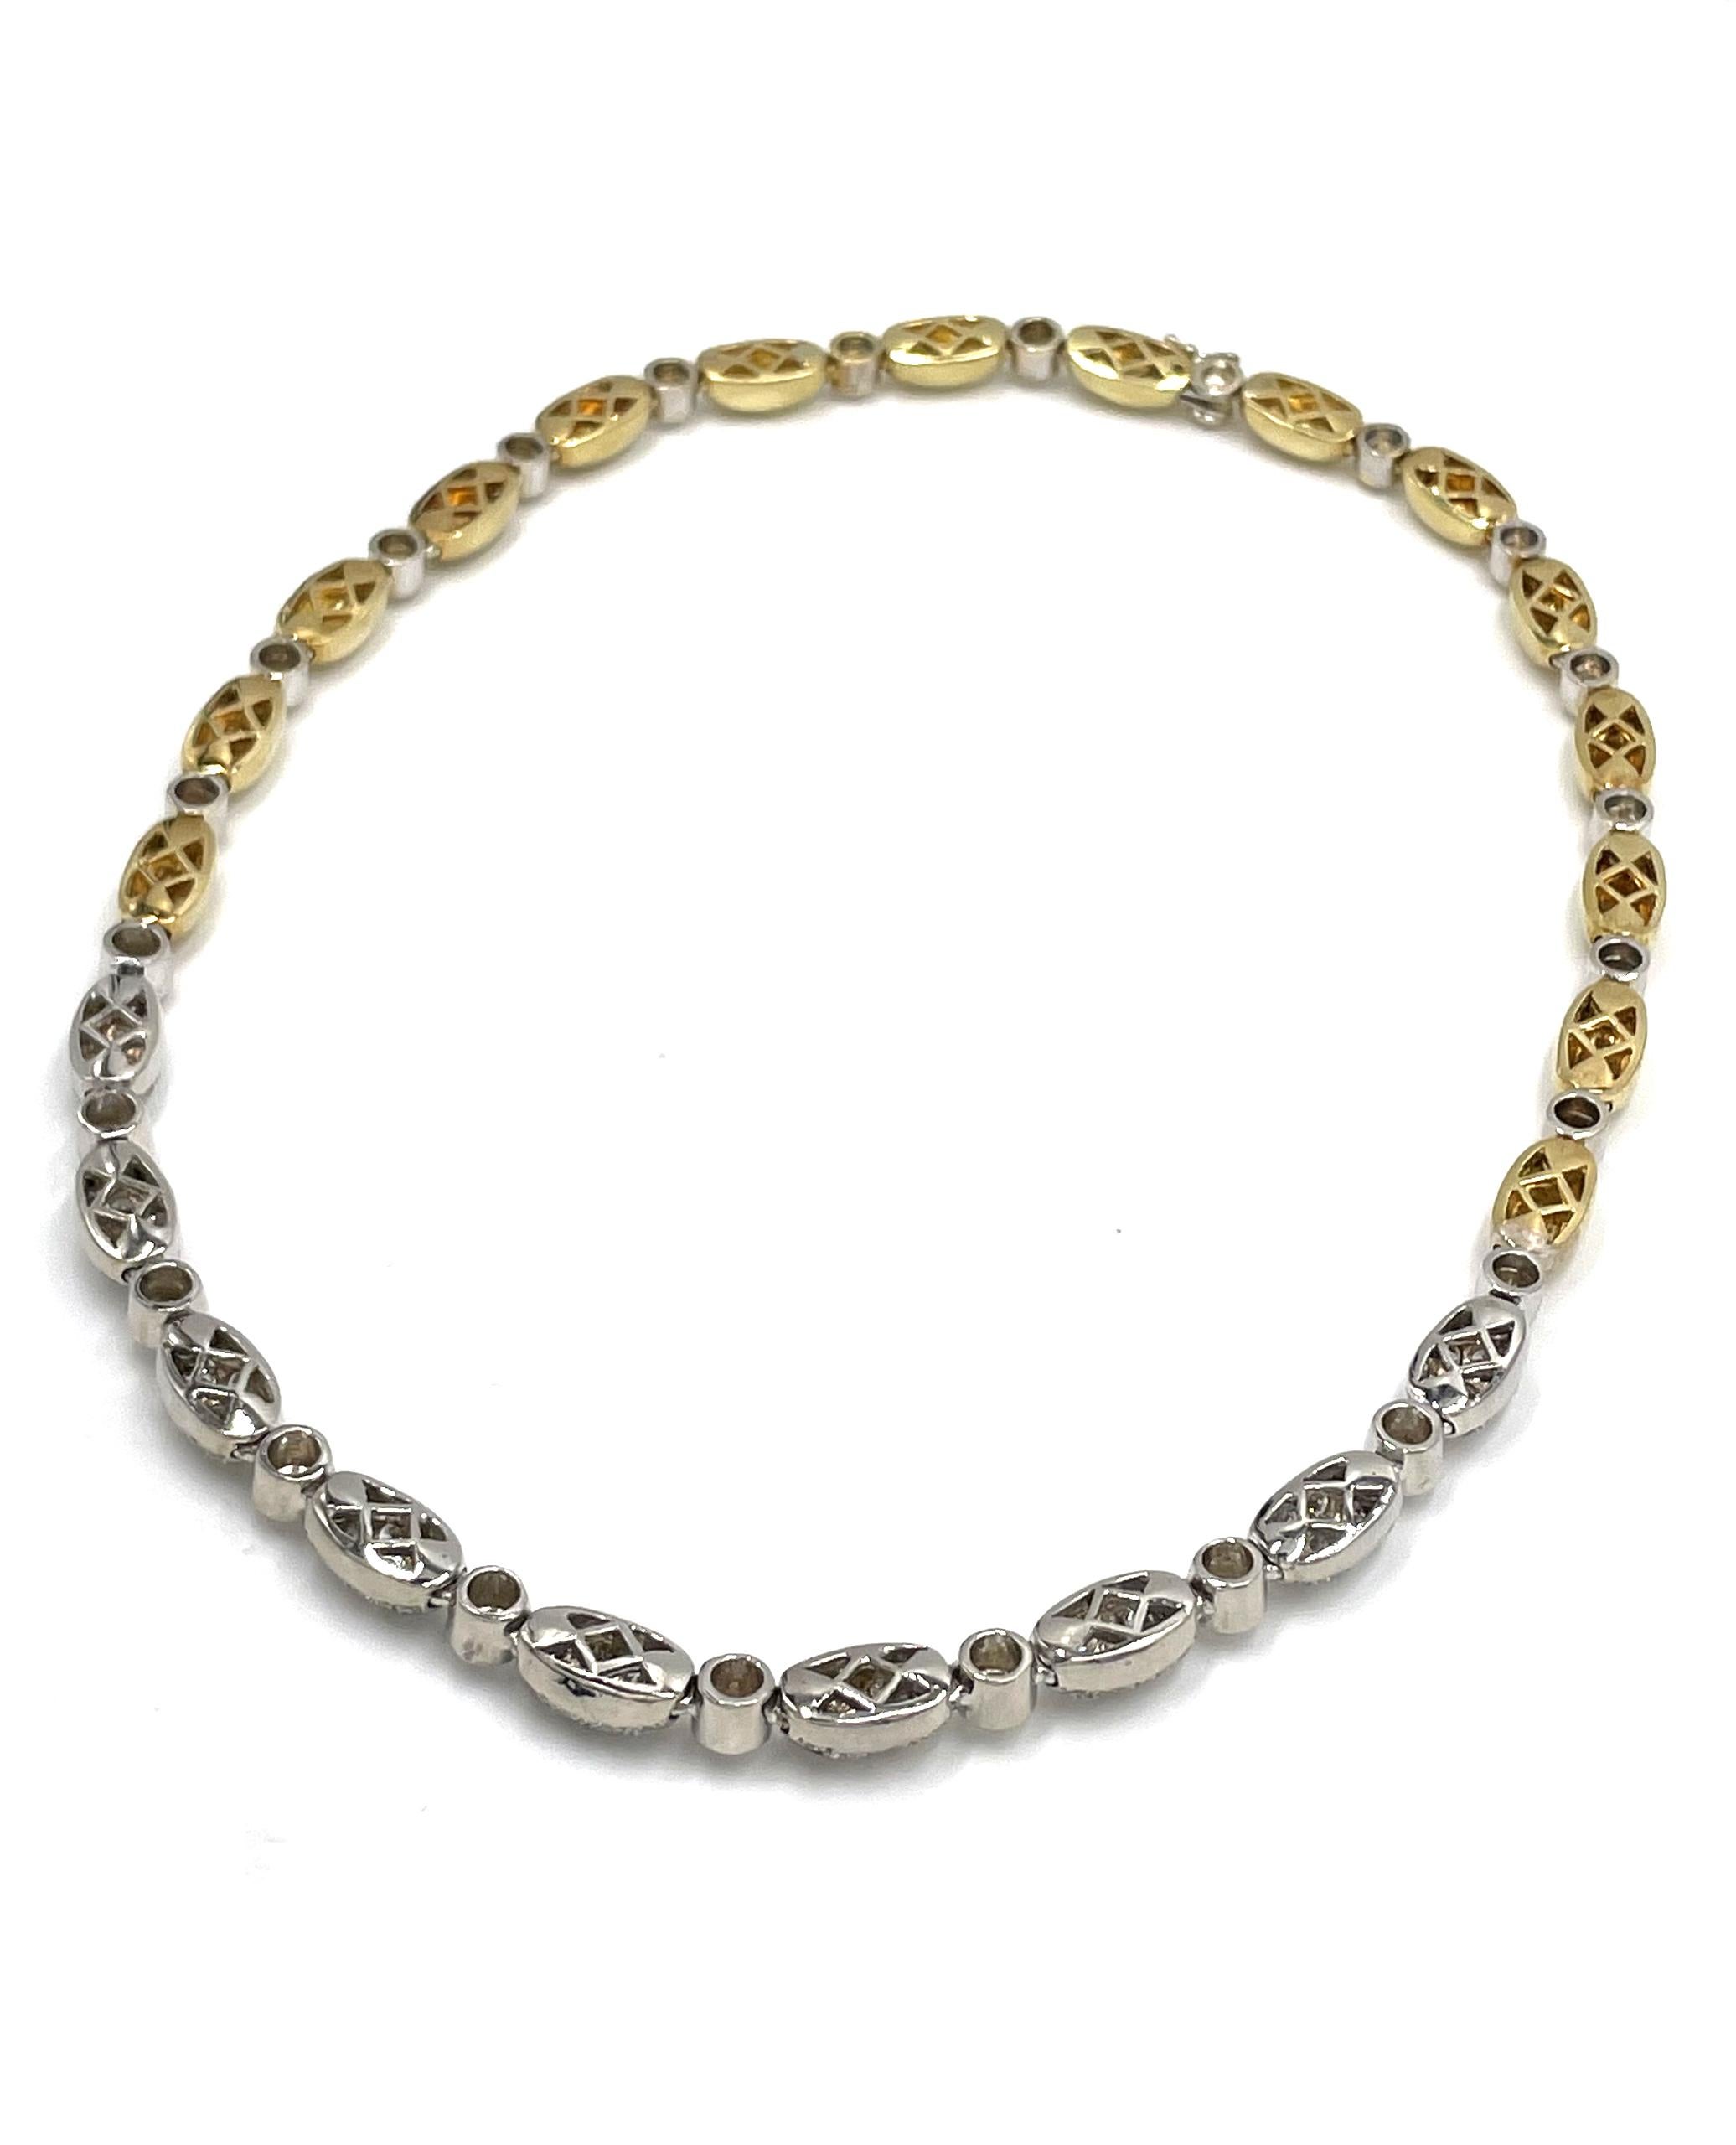 18K yellow and white gold necklace with 97 round brilliant-cut diamonds 16.97 carats.

- G/H color, VS2/SI1 clarity.
- Pave and bezel set 
- Circa 1996